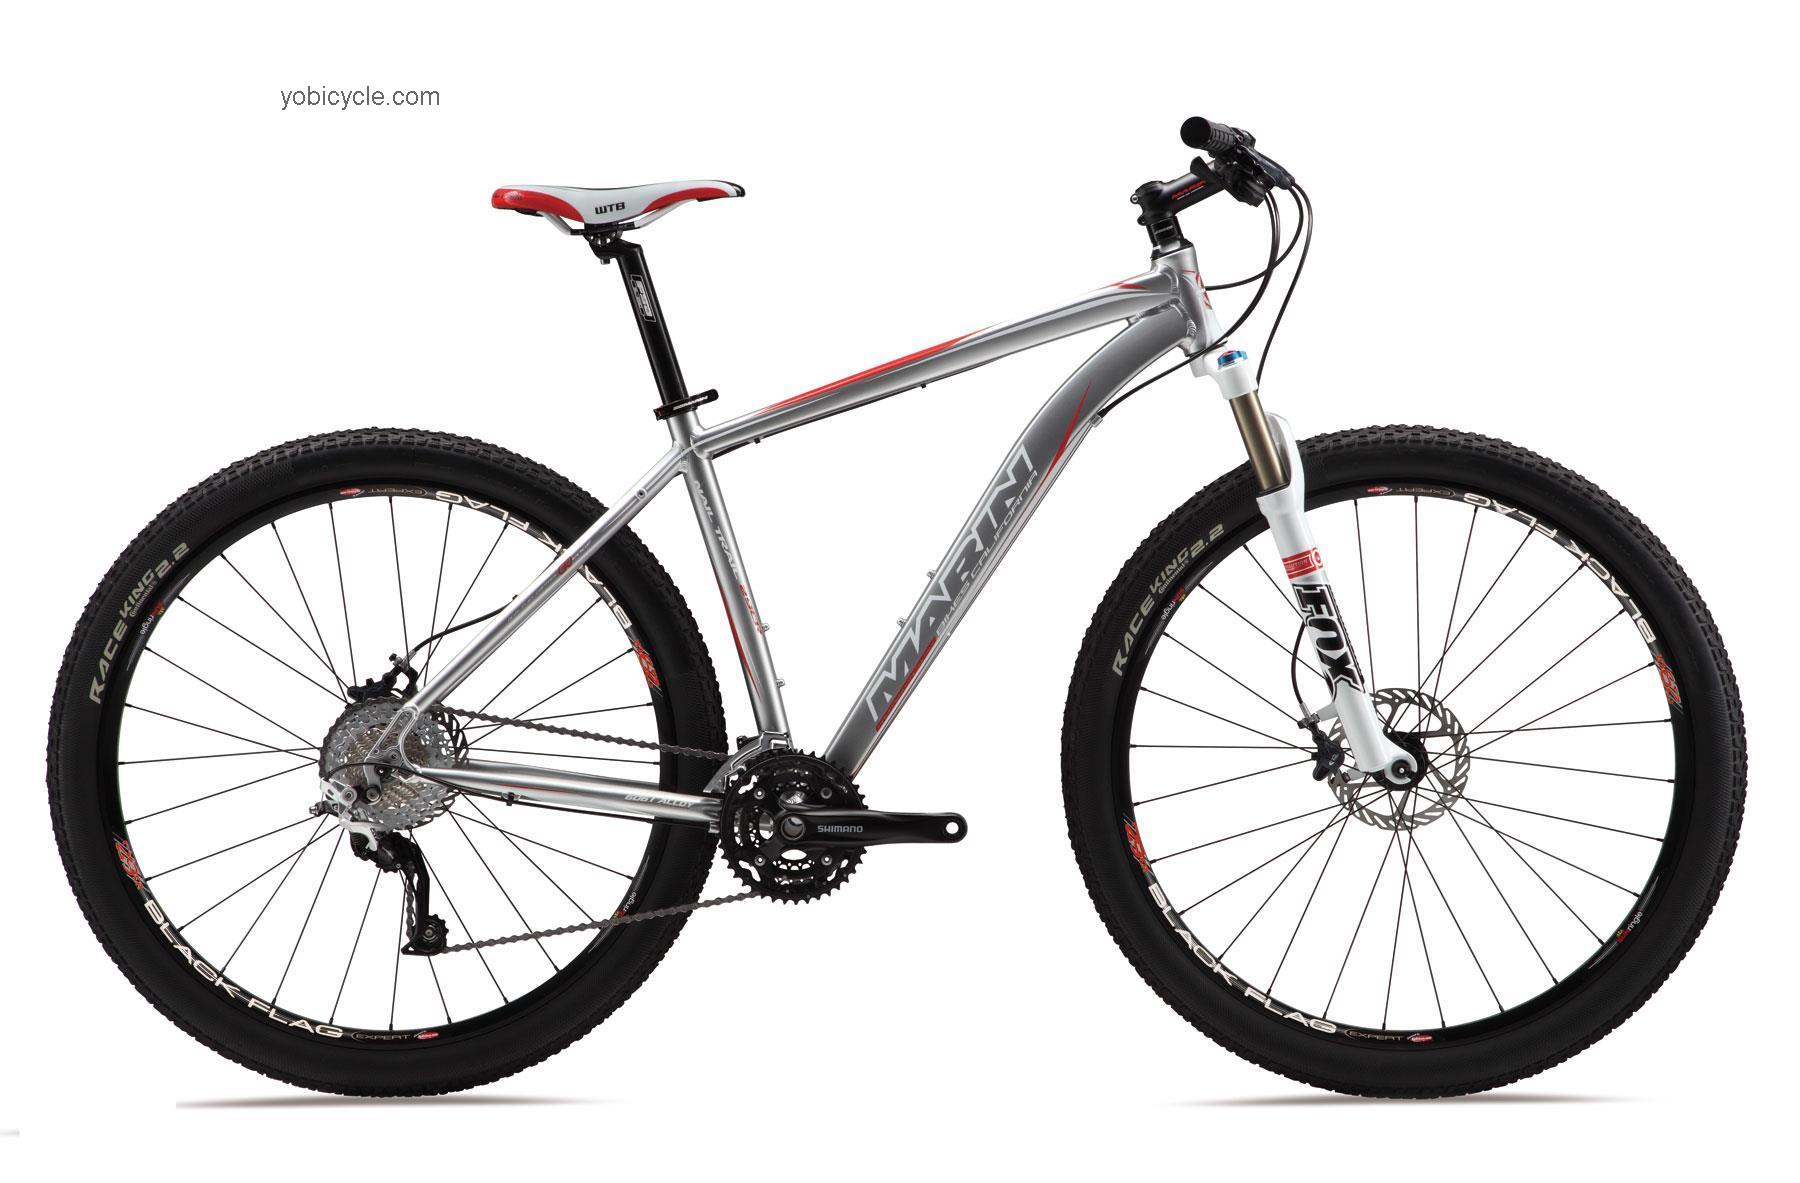 Marin Nail Trail 29er 2012 comparison online with competitors